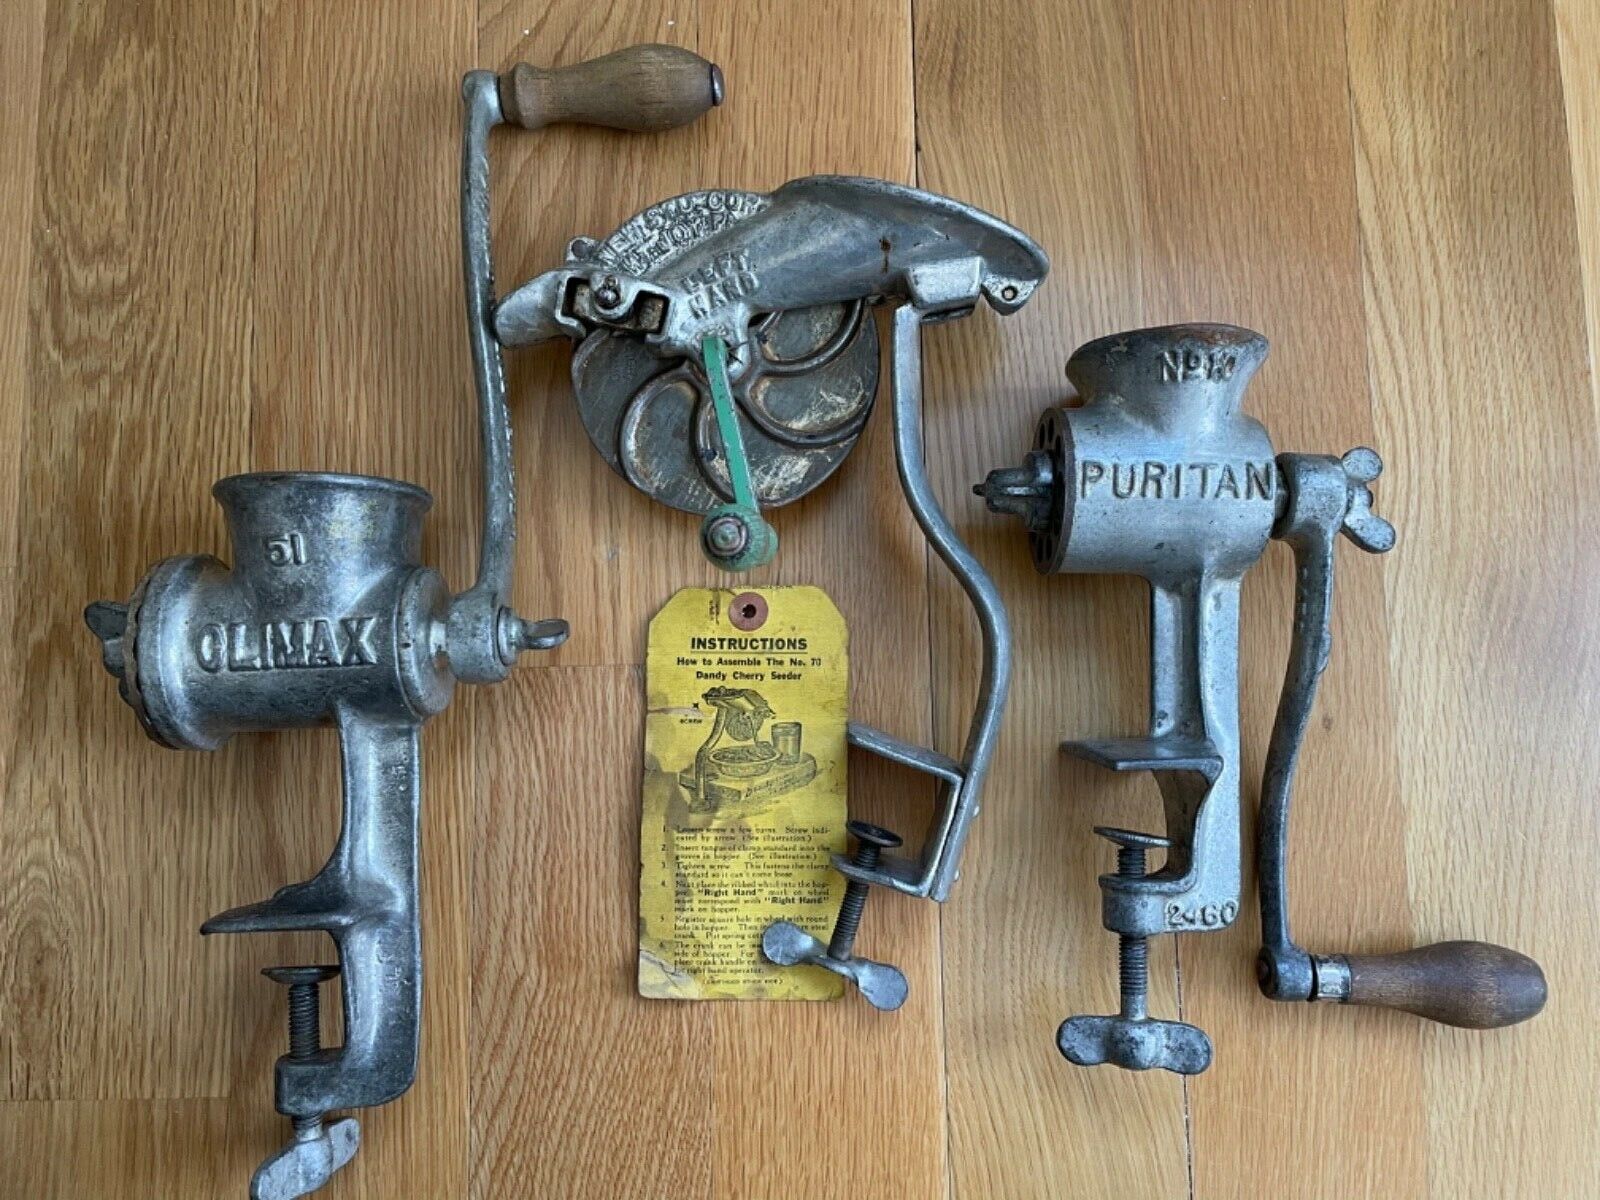 Lot of Vintage No. 70 Cherry Seeder, Puritan and Climax Meat Grinders